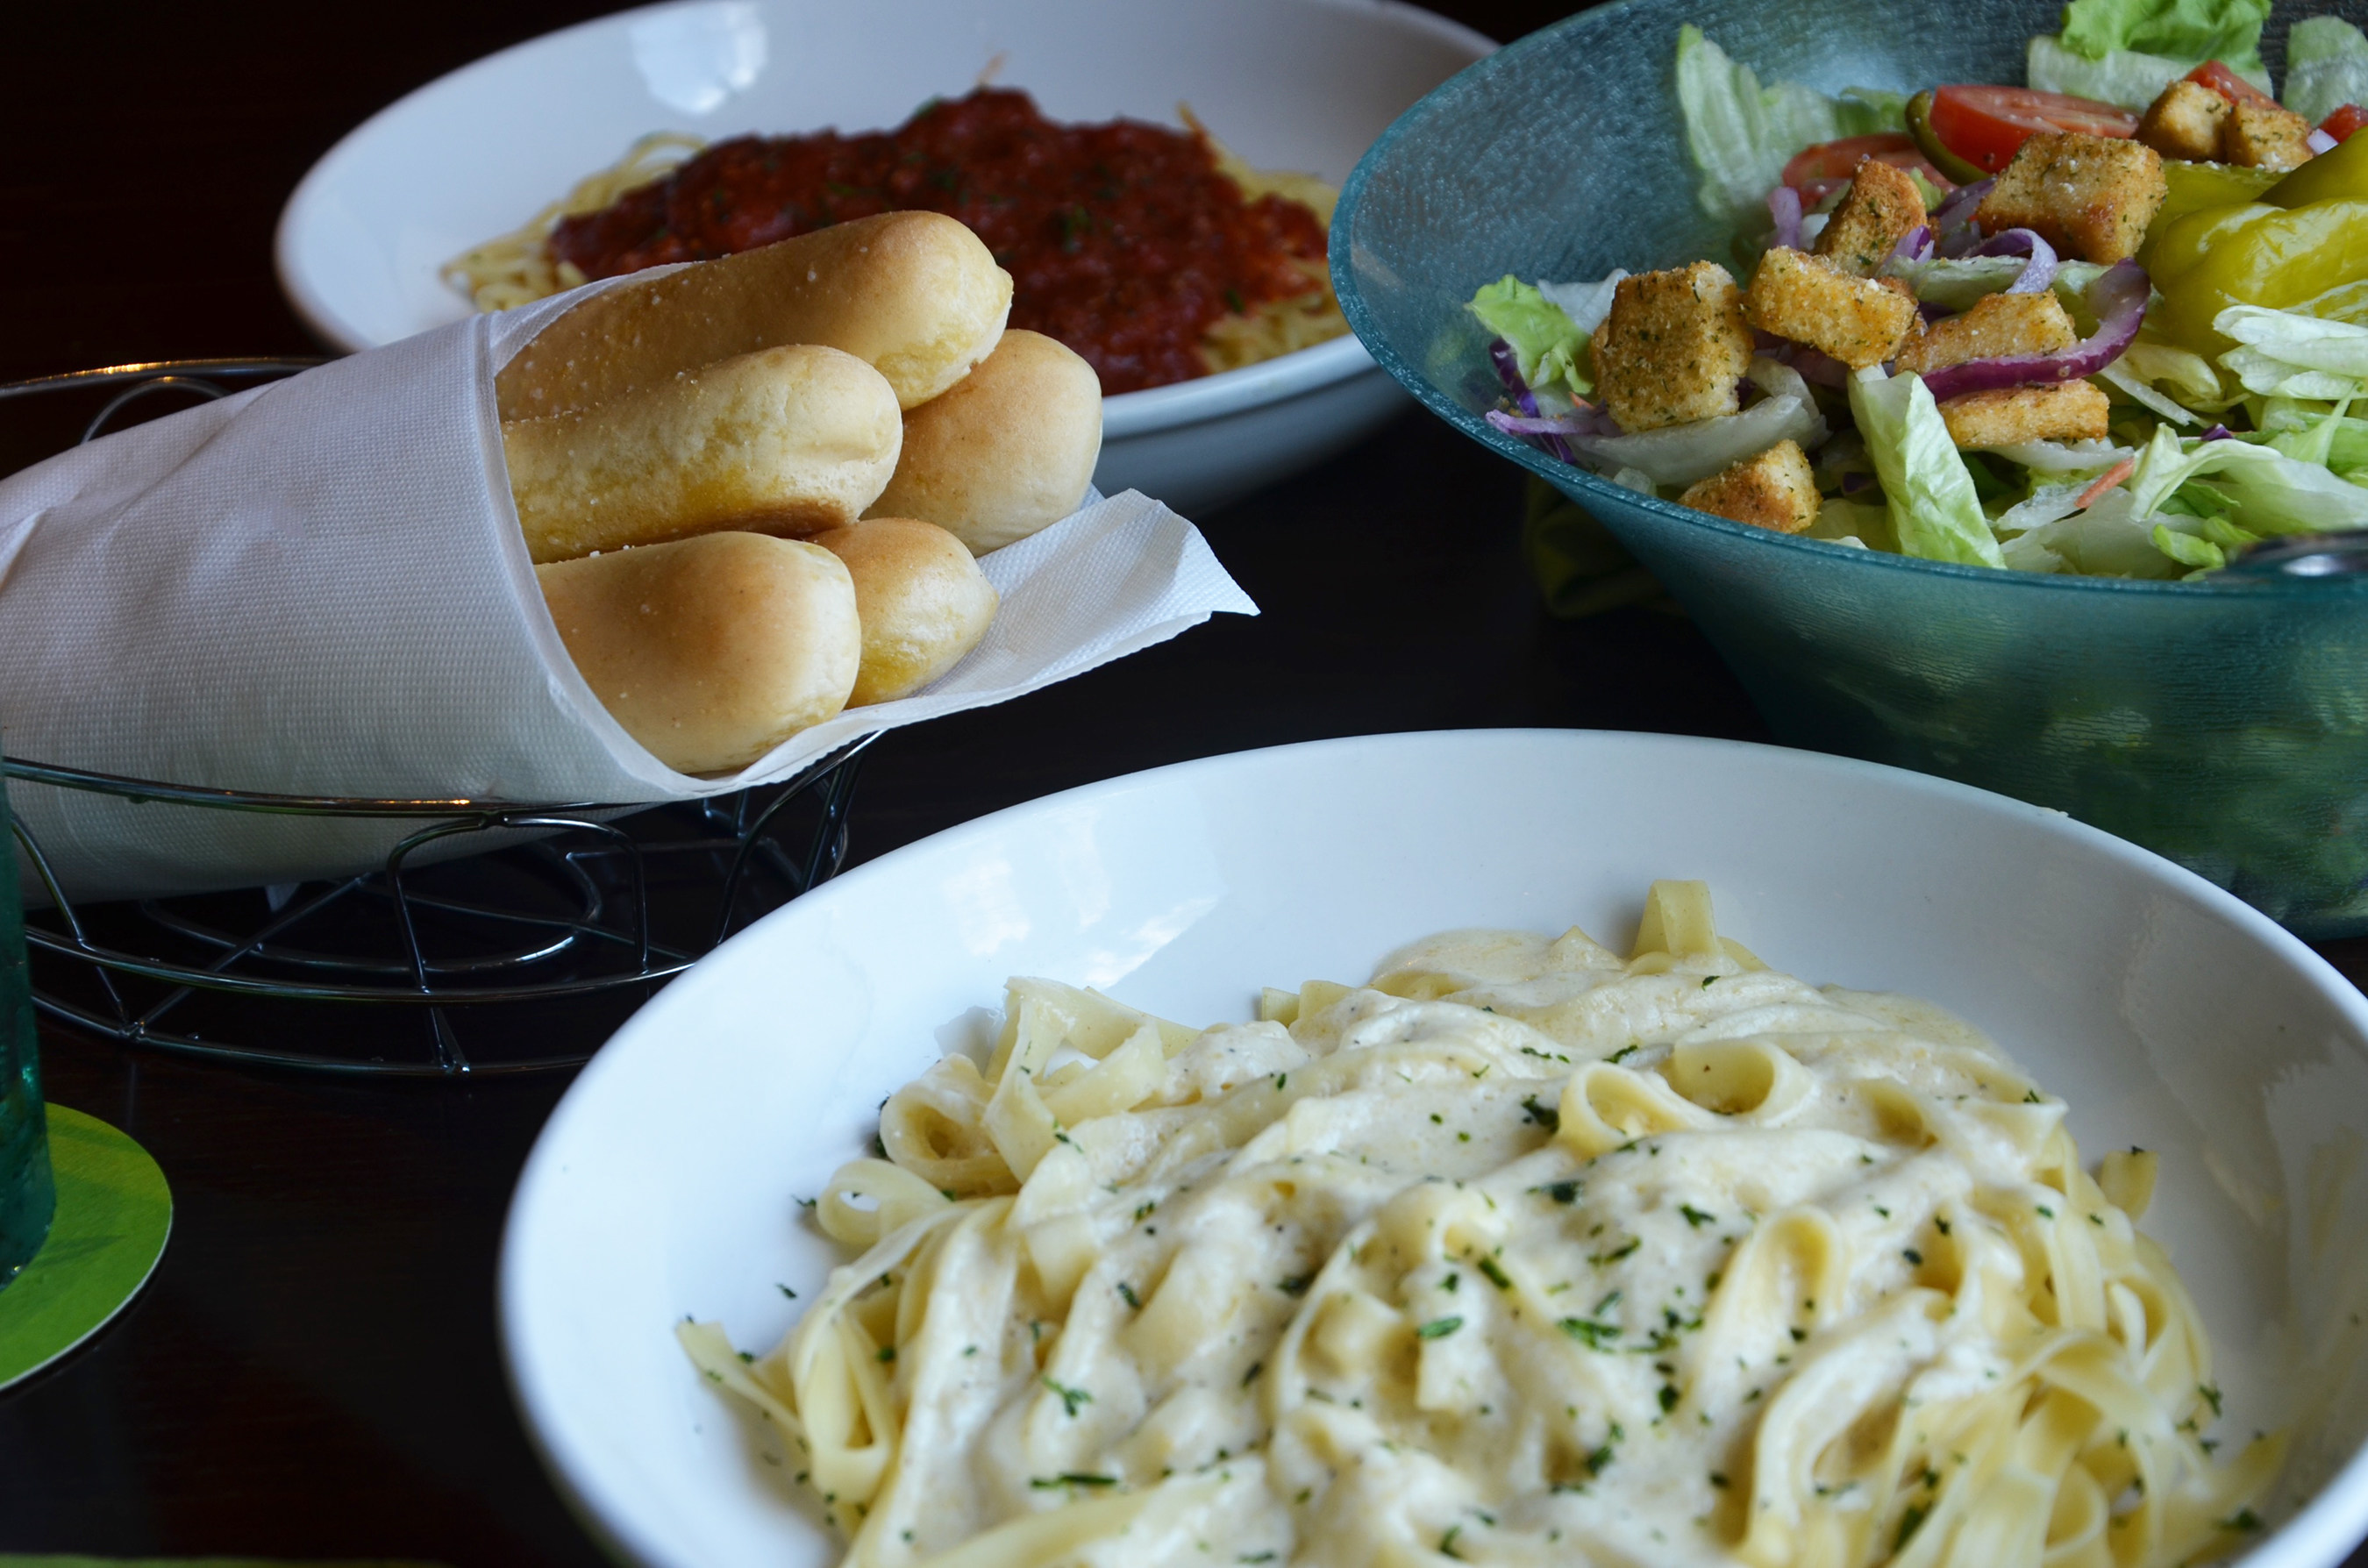 Olive Garden's Never Ending Pasta Bowl Celebrates 20th Anniversary With